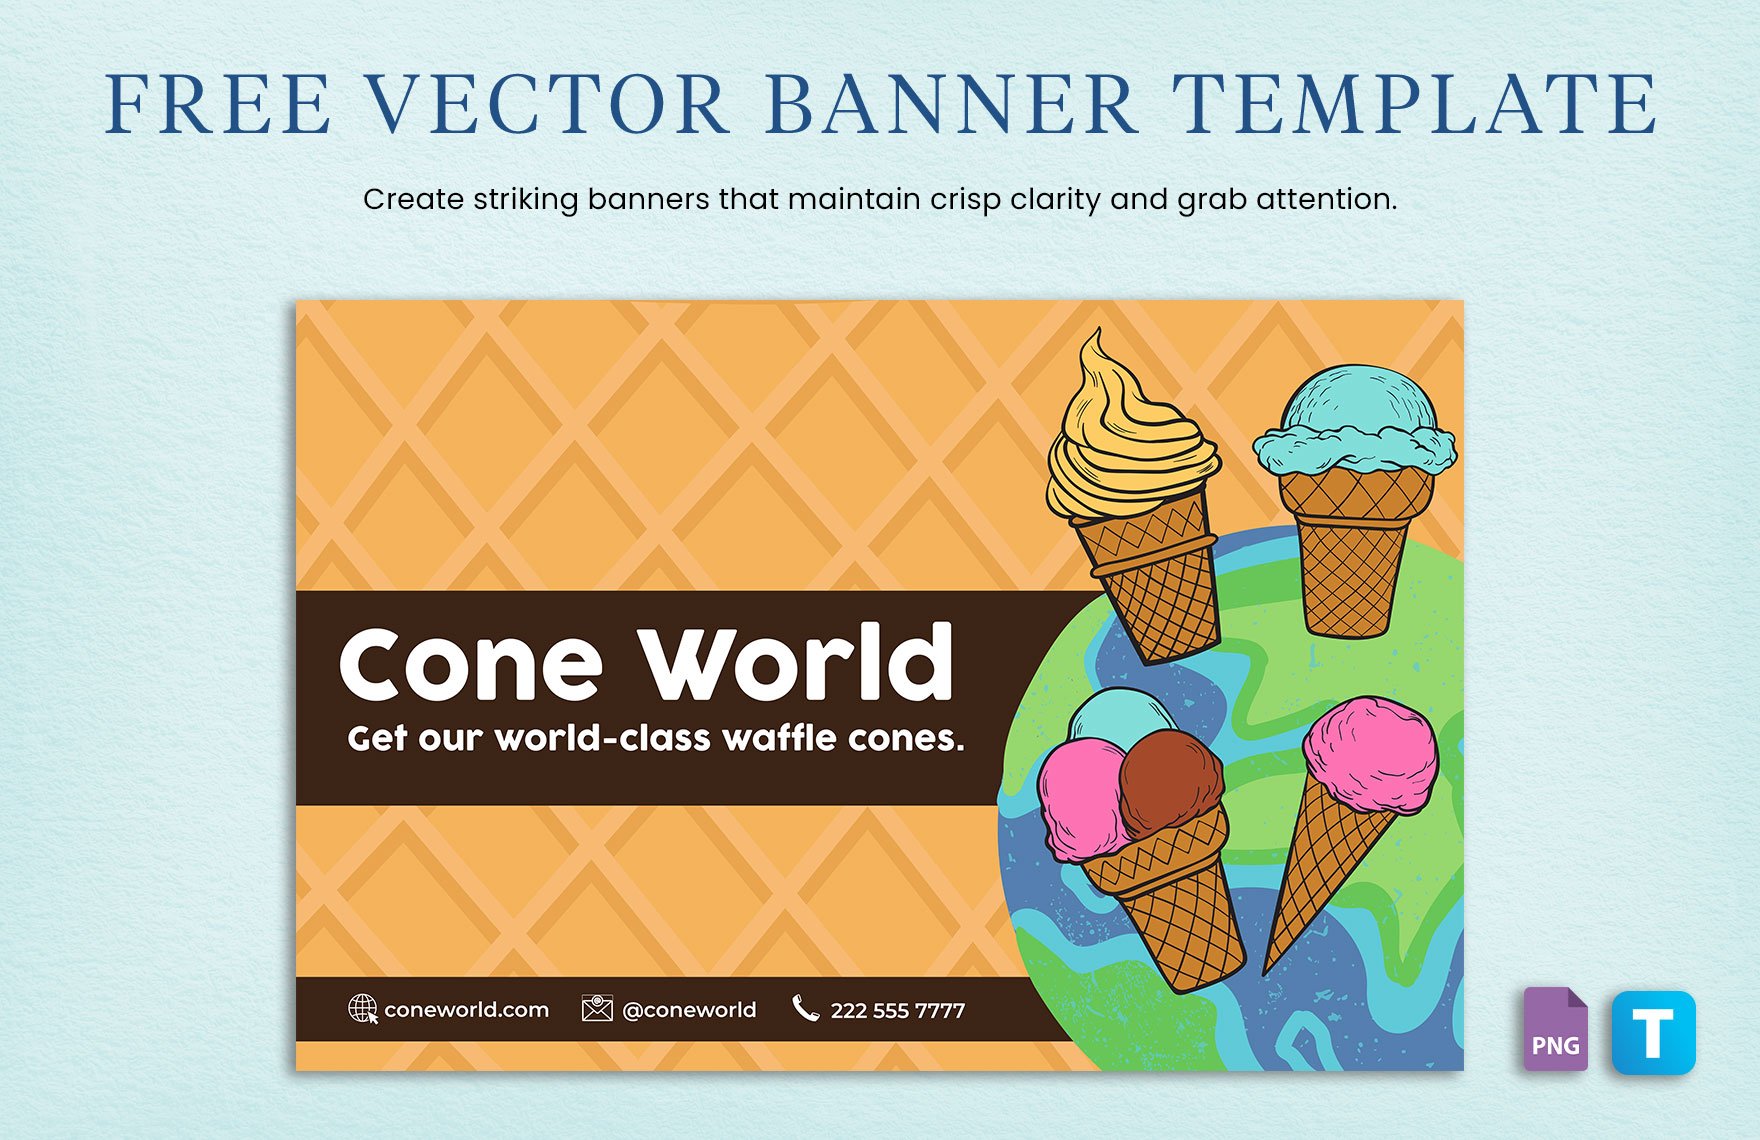 Free Vector Banner Template in PNG